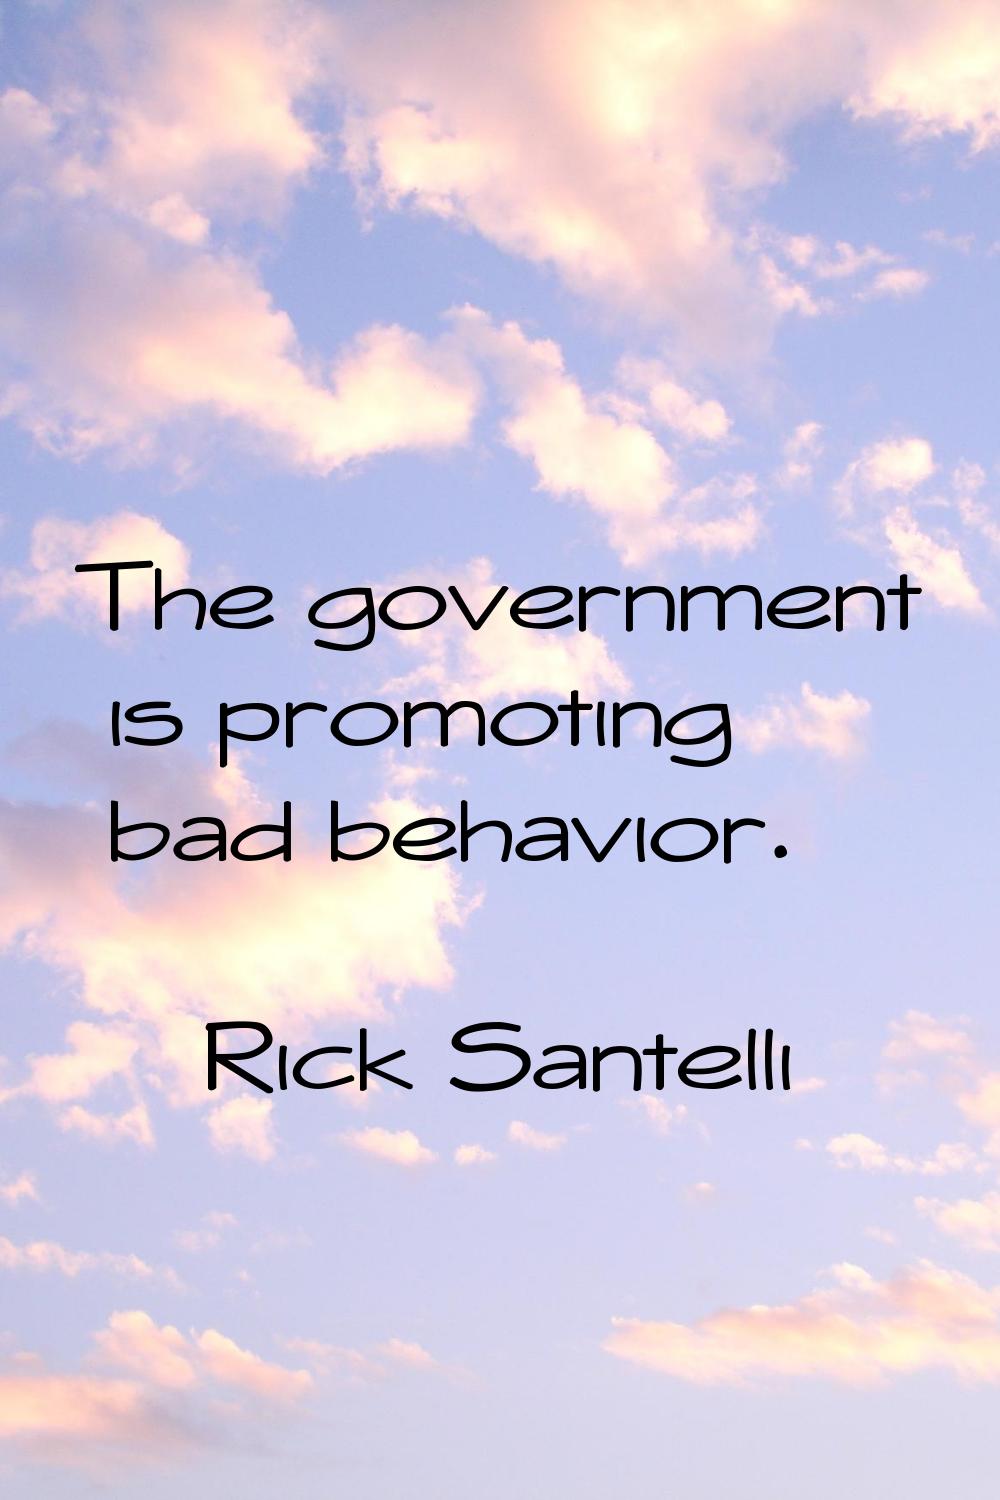 The government is promoting bad behavior.